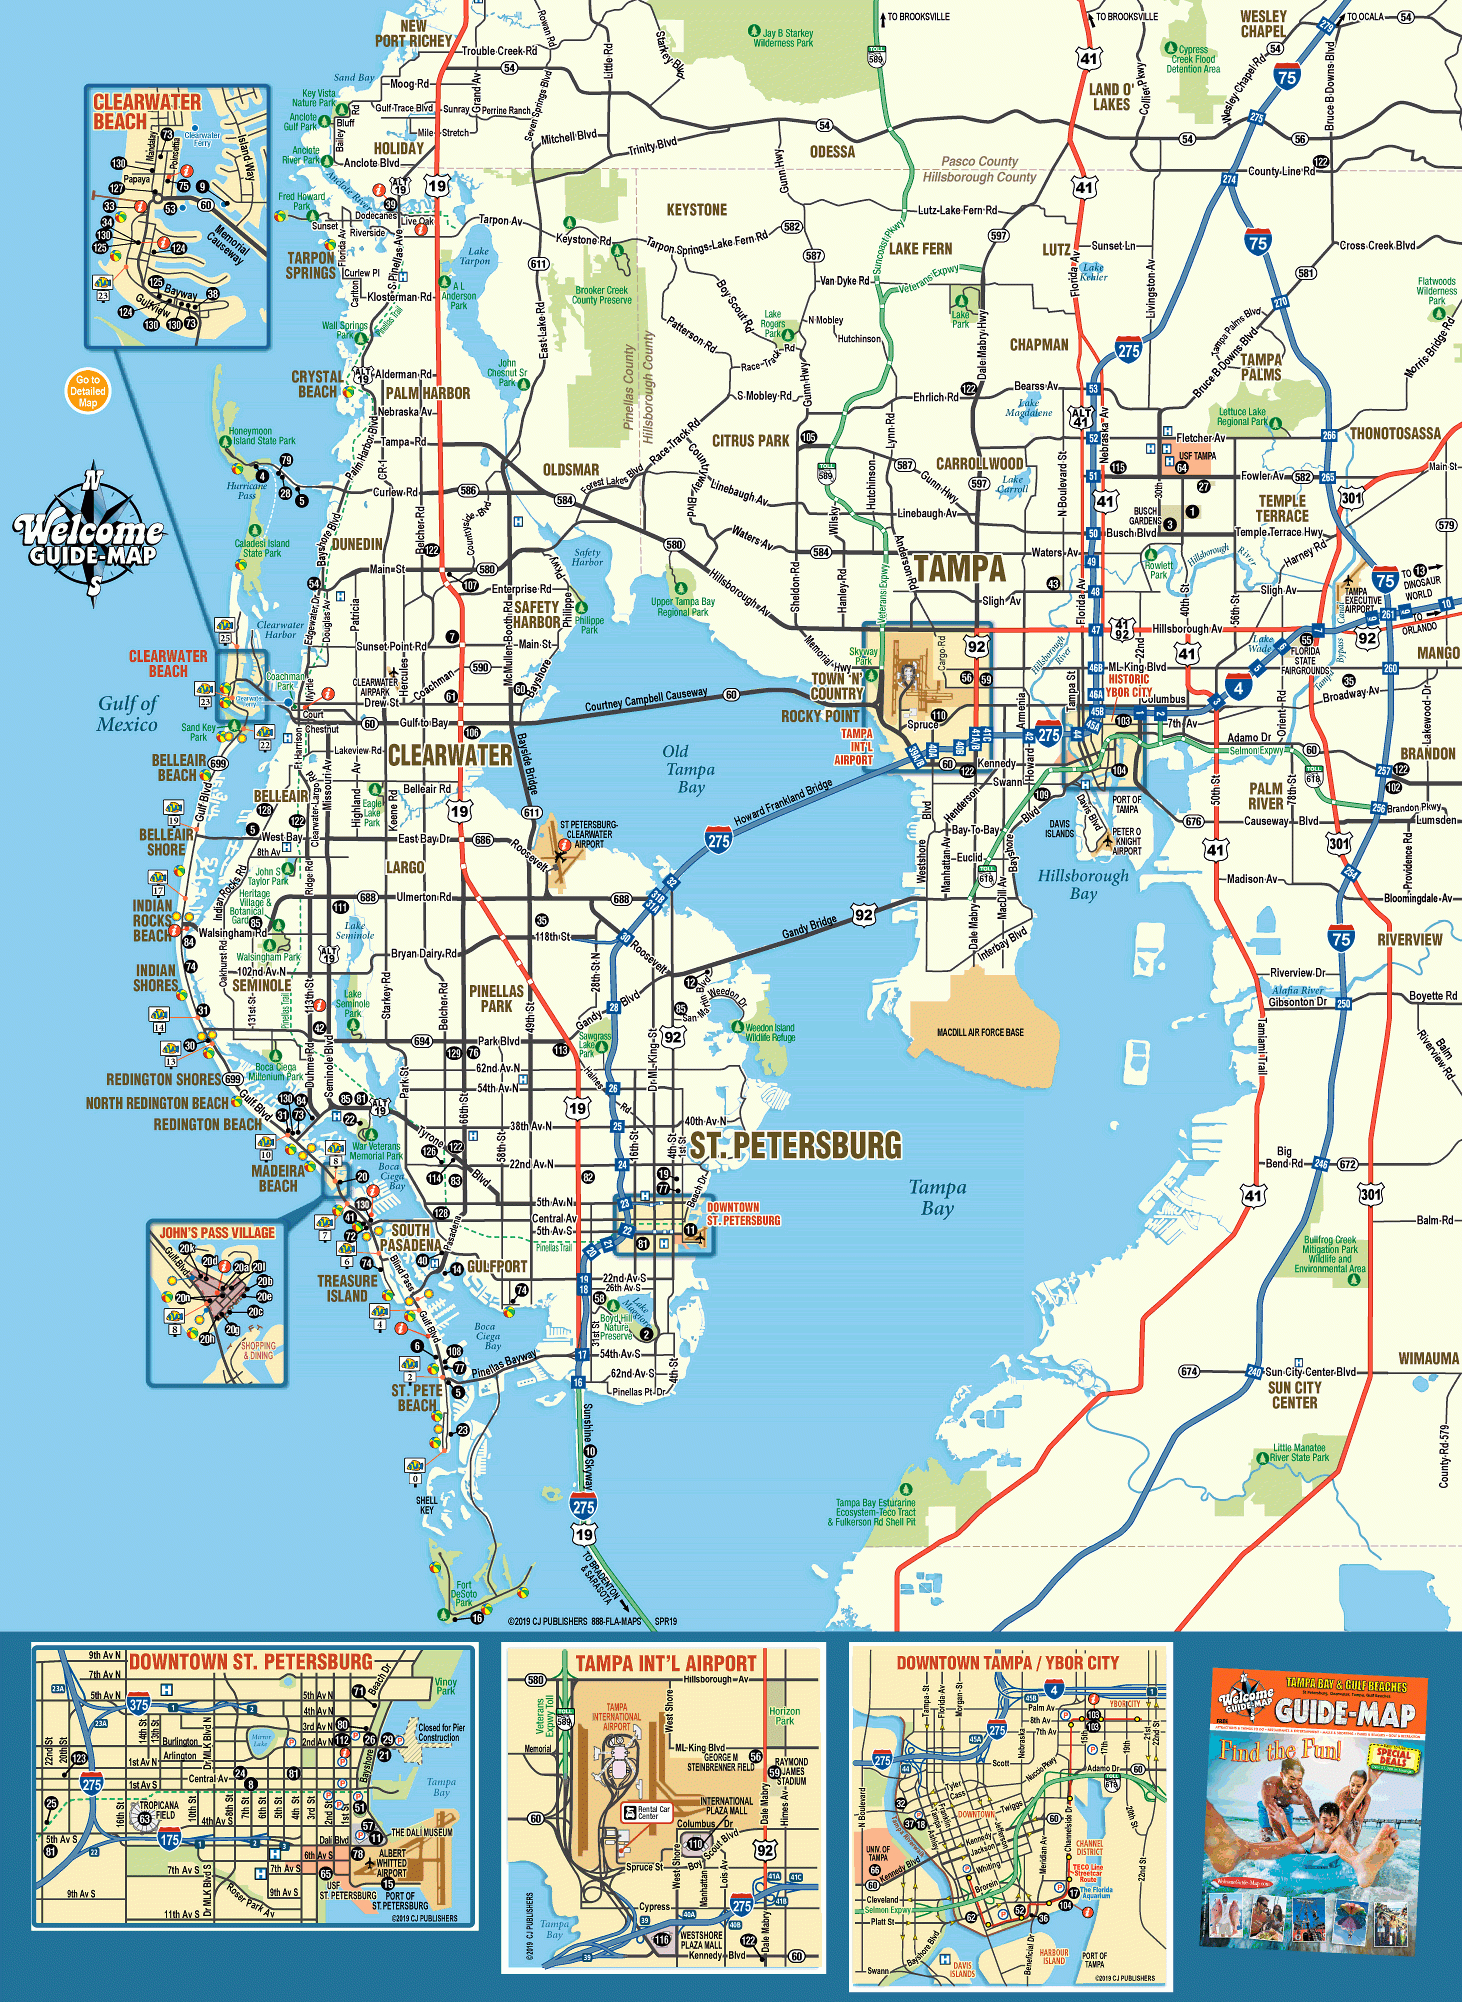 Map Of Tampa Bay Florida - Welcome Guide-Map To Tampa Bay Florida - Citrus Cove Florida Map